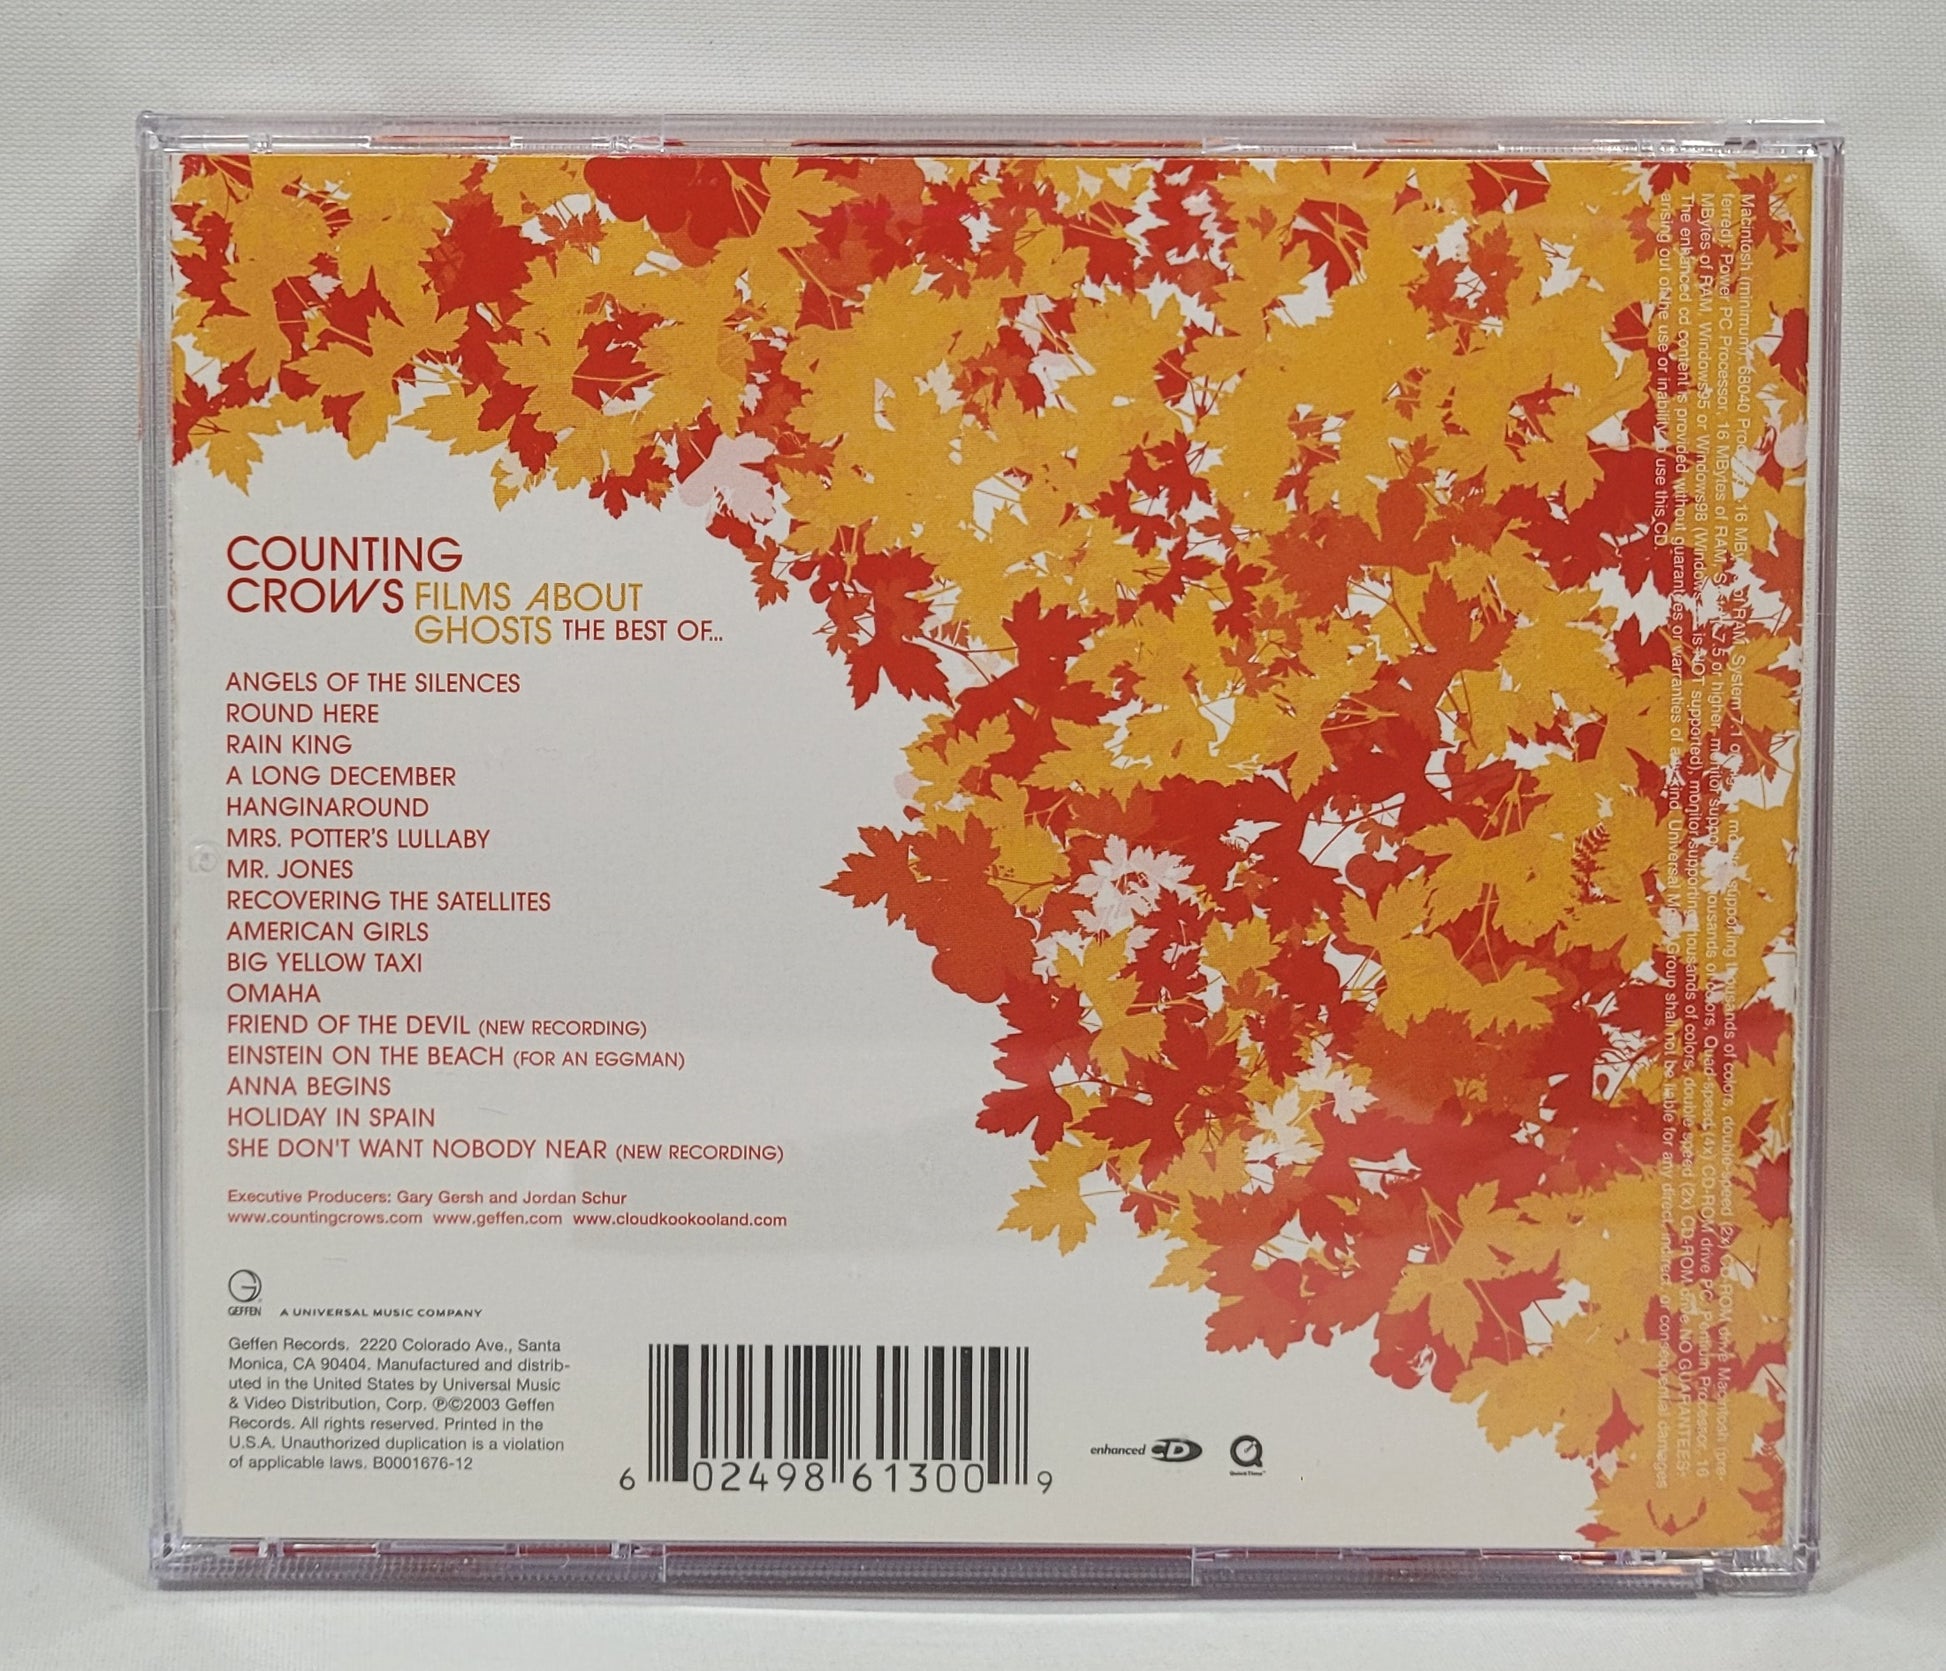 Counting Crows - Films About Ghosts (The Best Of...) [2004 Enhanced] [Used CD]